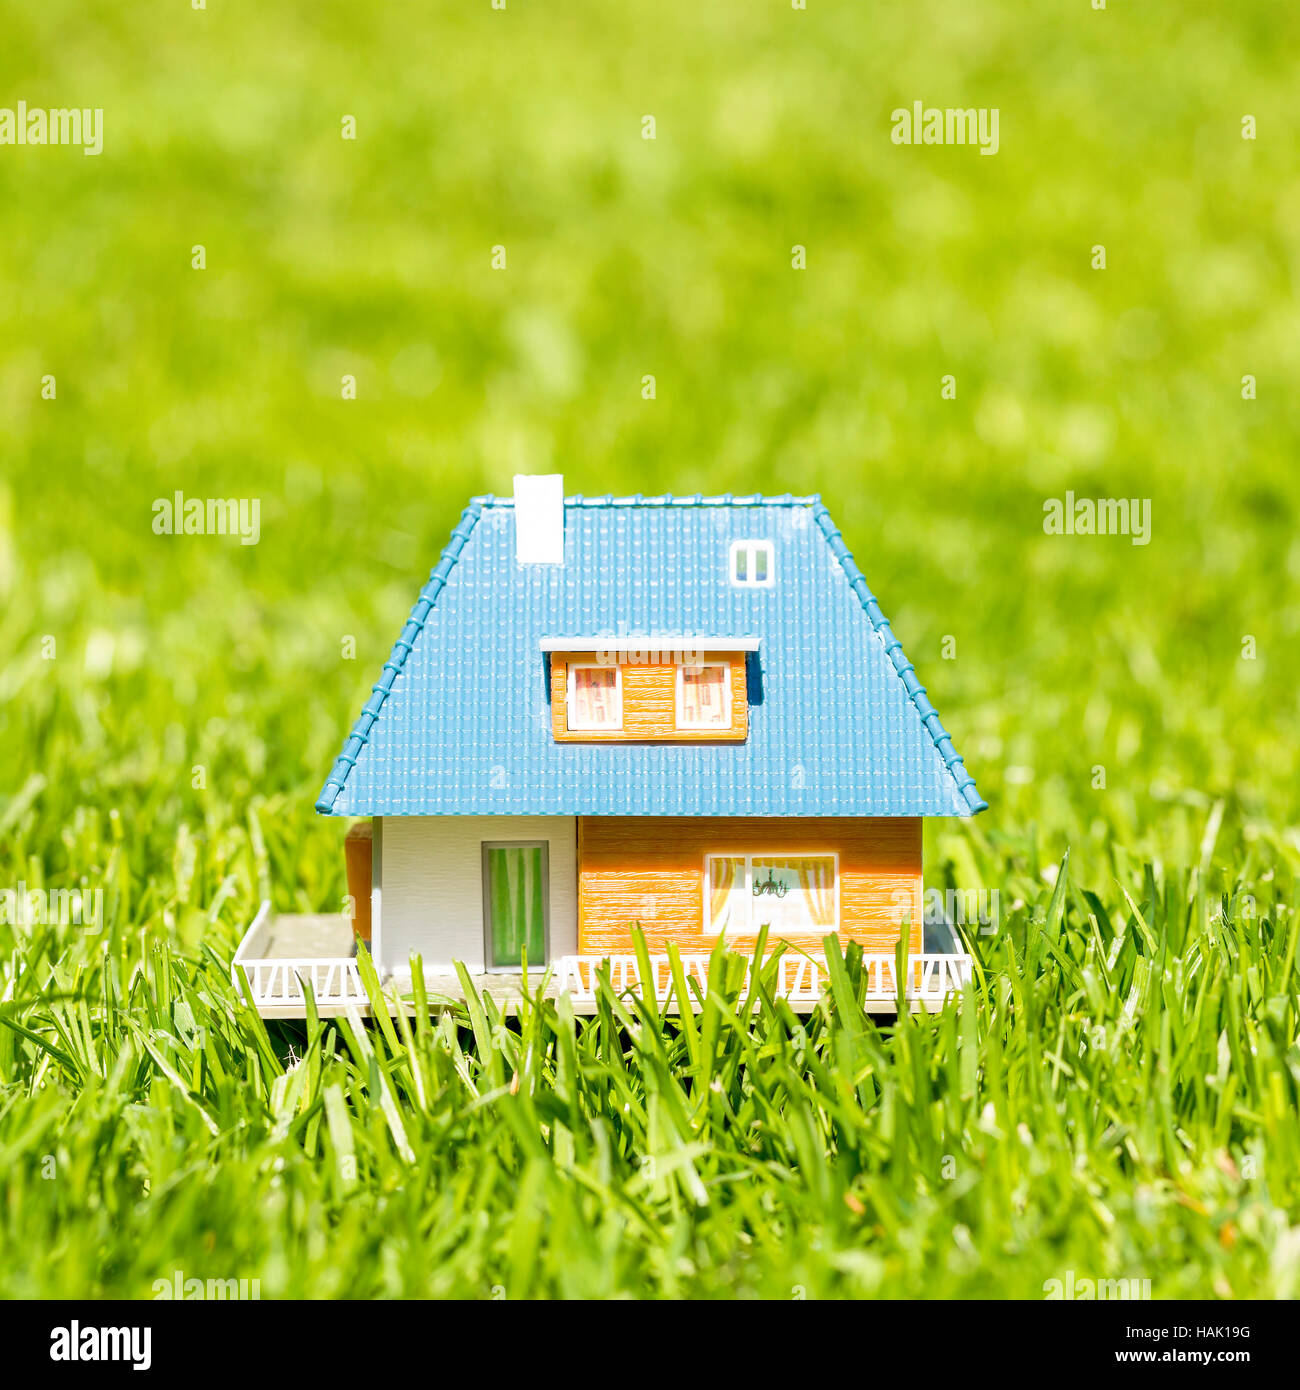 small plastic house on green grass Stock Photo